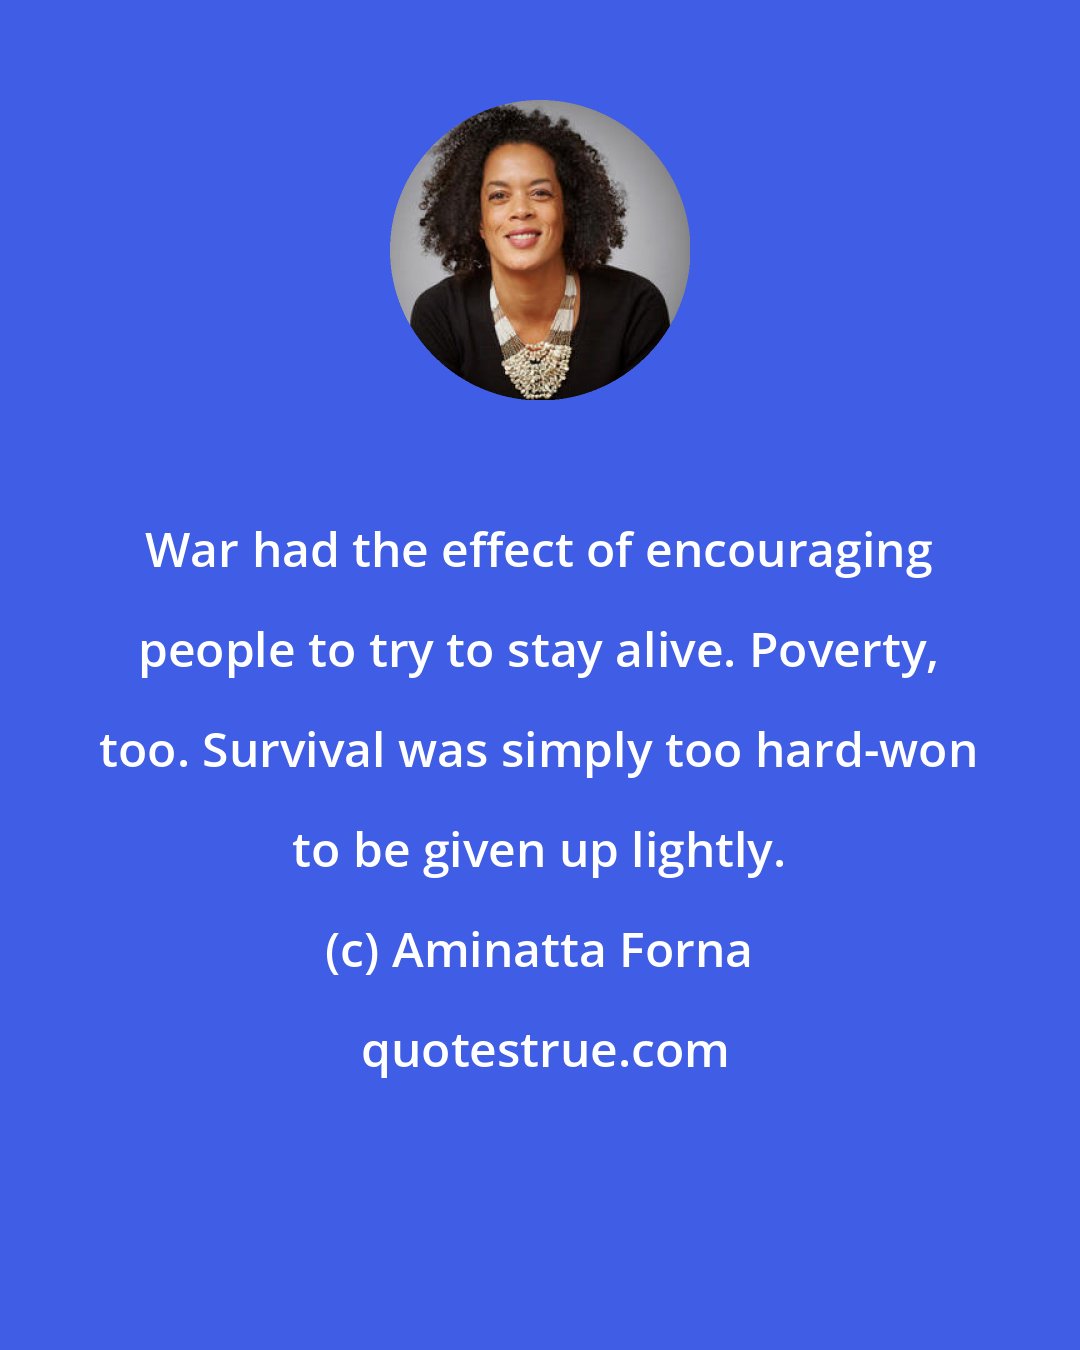 Aminatta Forna: War had the effect of encouraging people to try to stay alive. Poverty, too. Survival was simply too hard-won to be given up lightly.